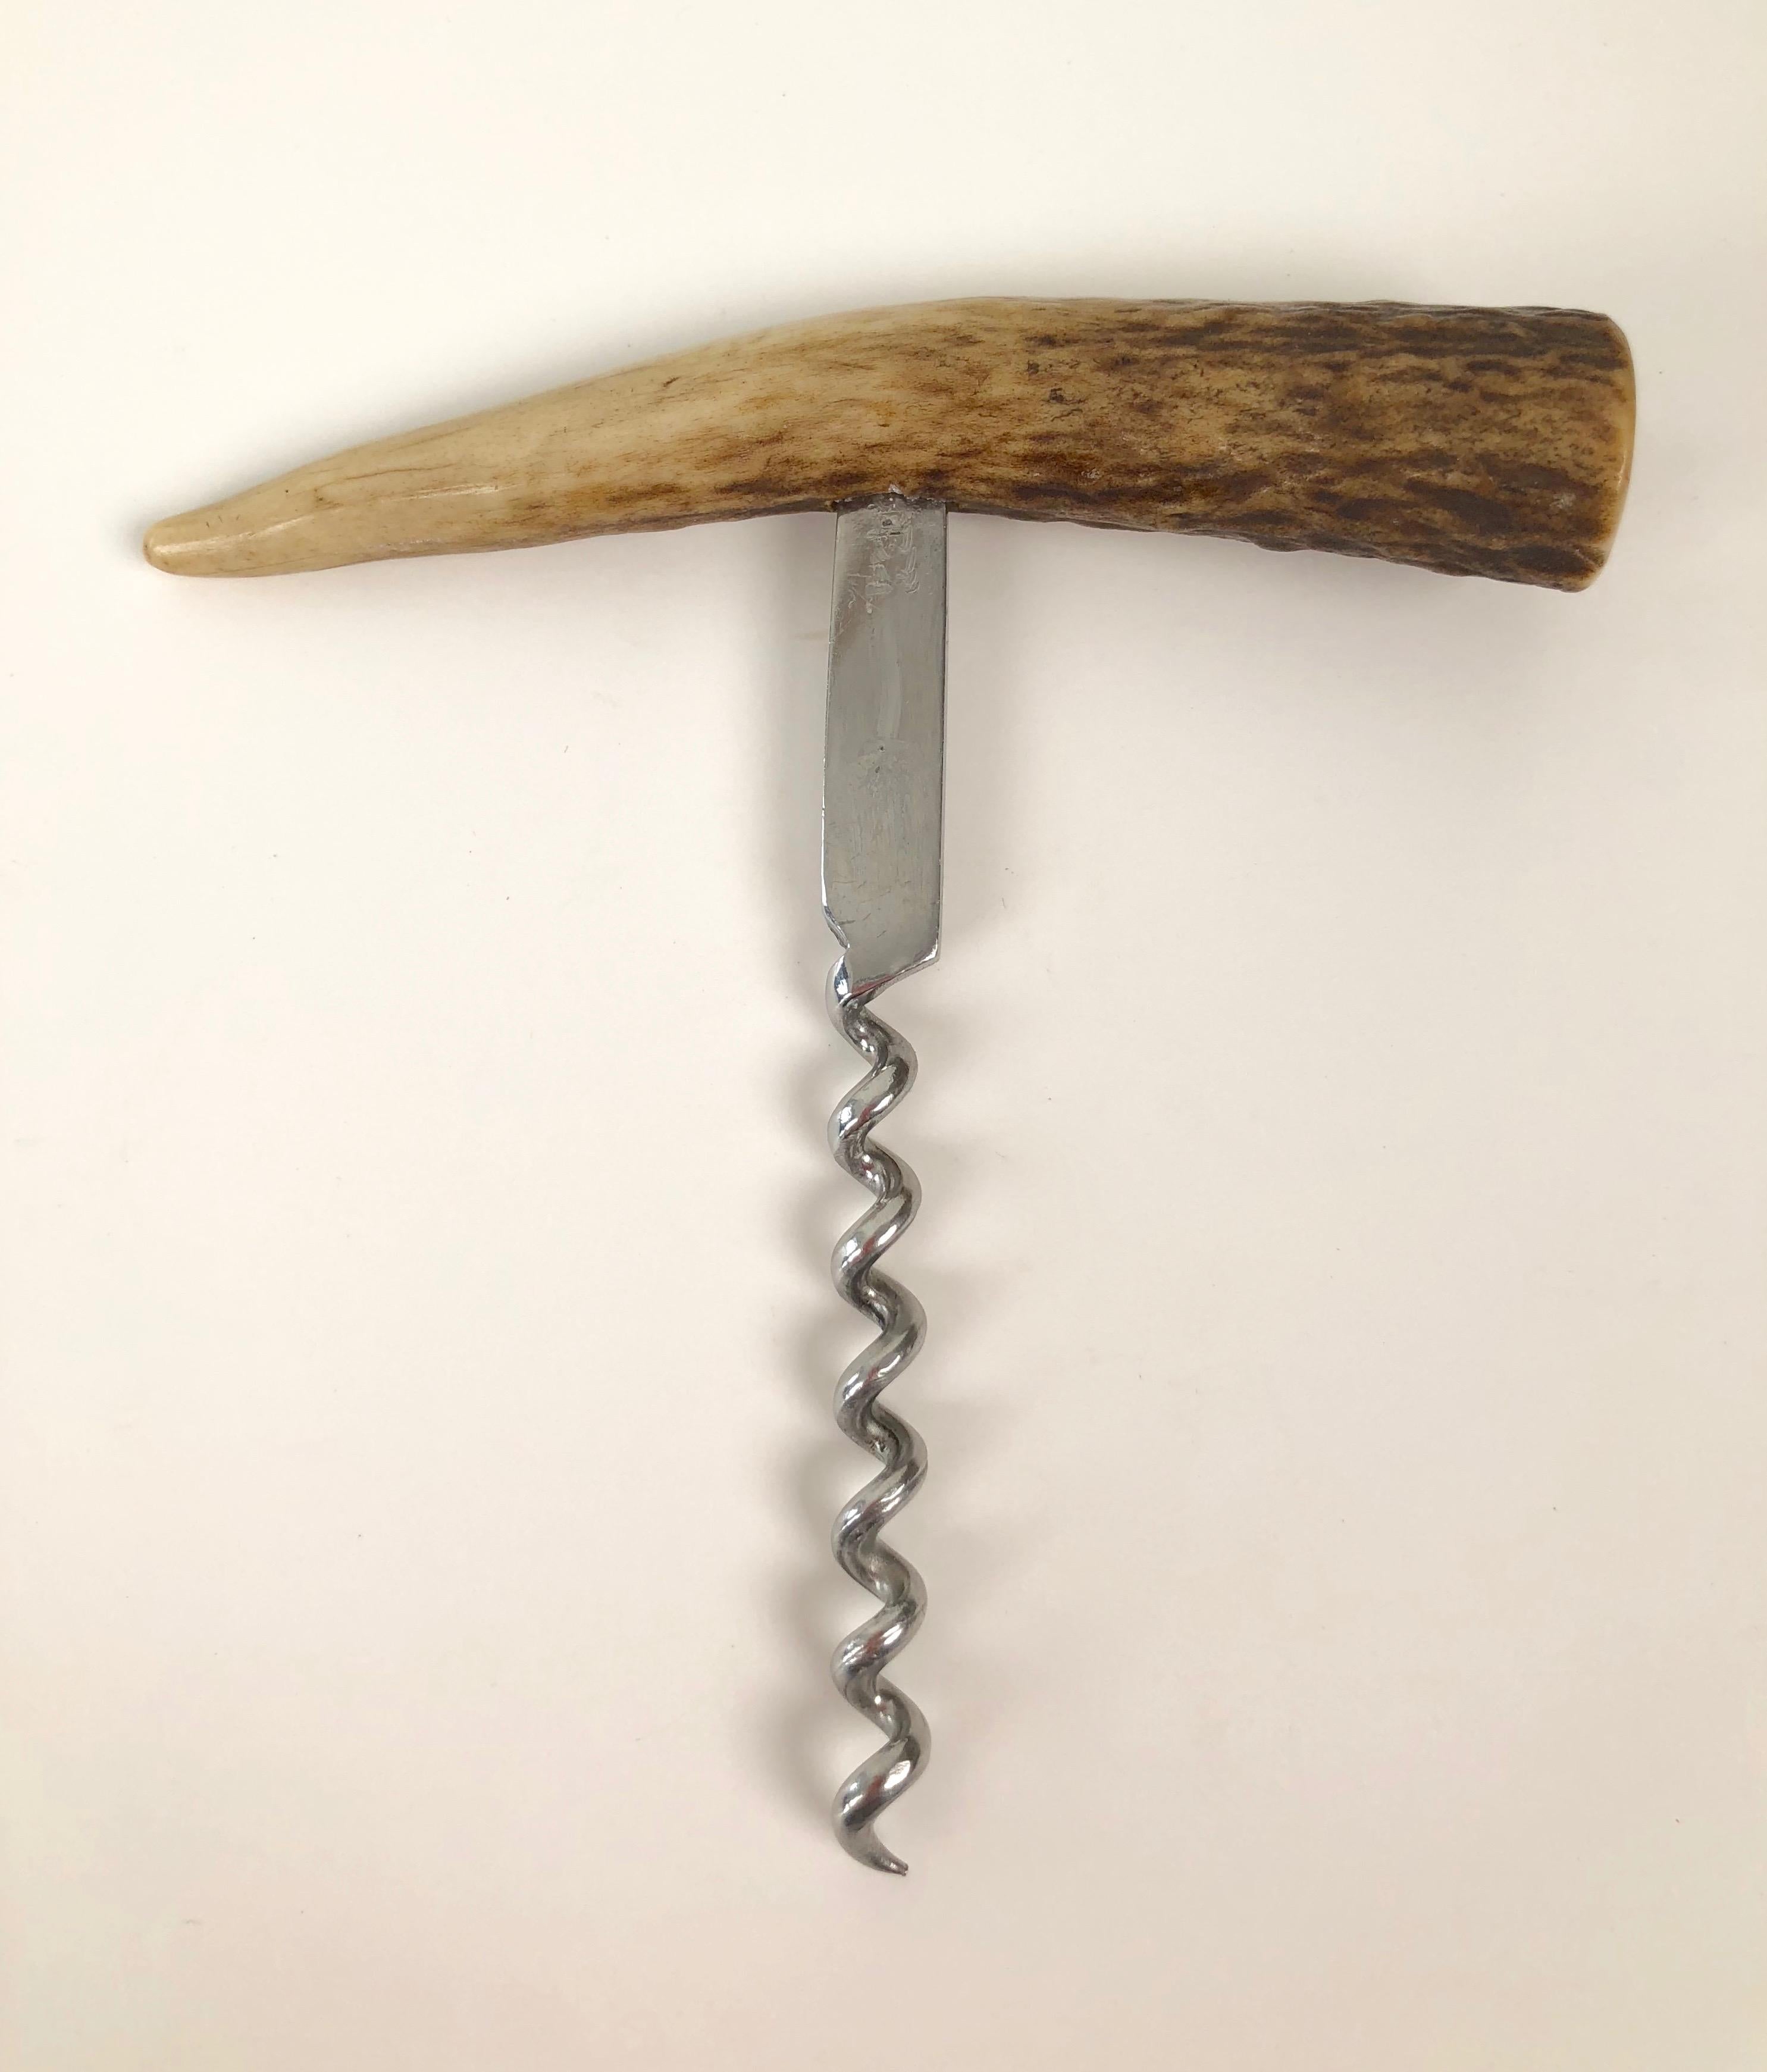 A vintage corkscrew from Amboss Austria, from the early 1950s. The handle is made from the tip of a deer antler
and held in place with a pin which goes through the handle. There is small amount of side play from
use. It has been tested and is in